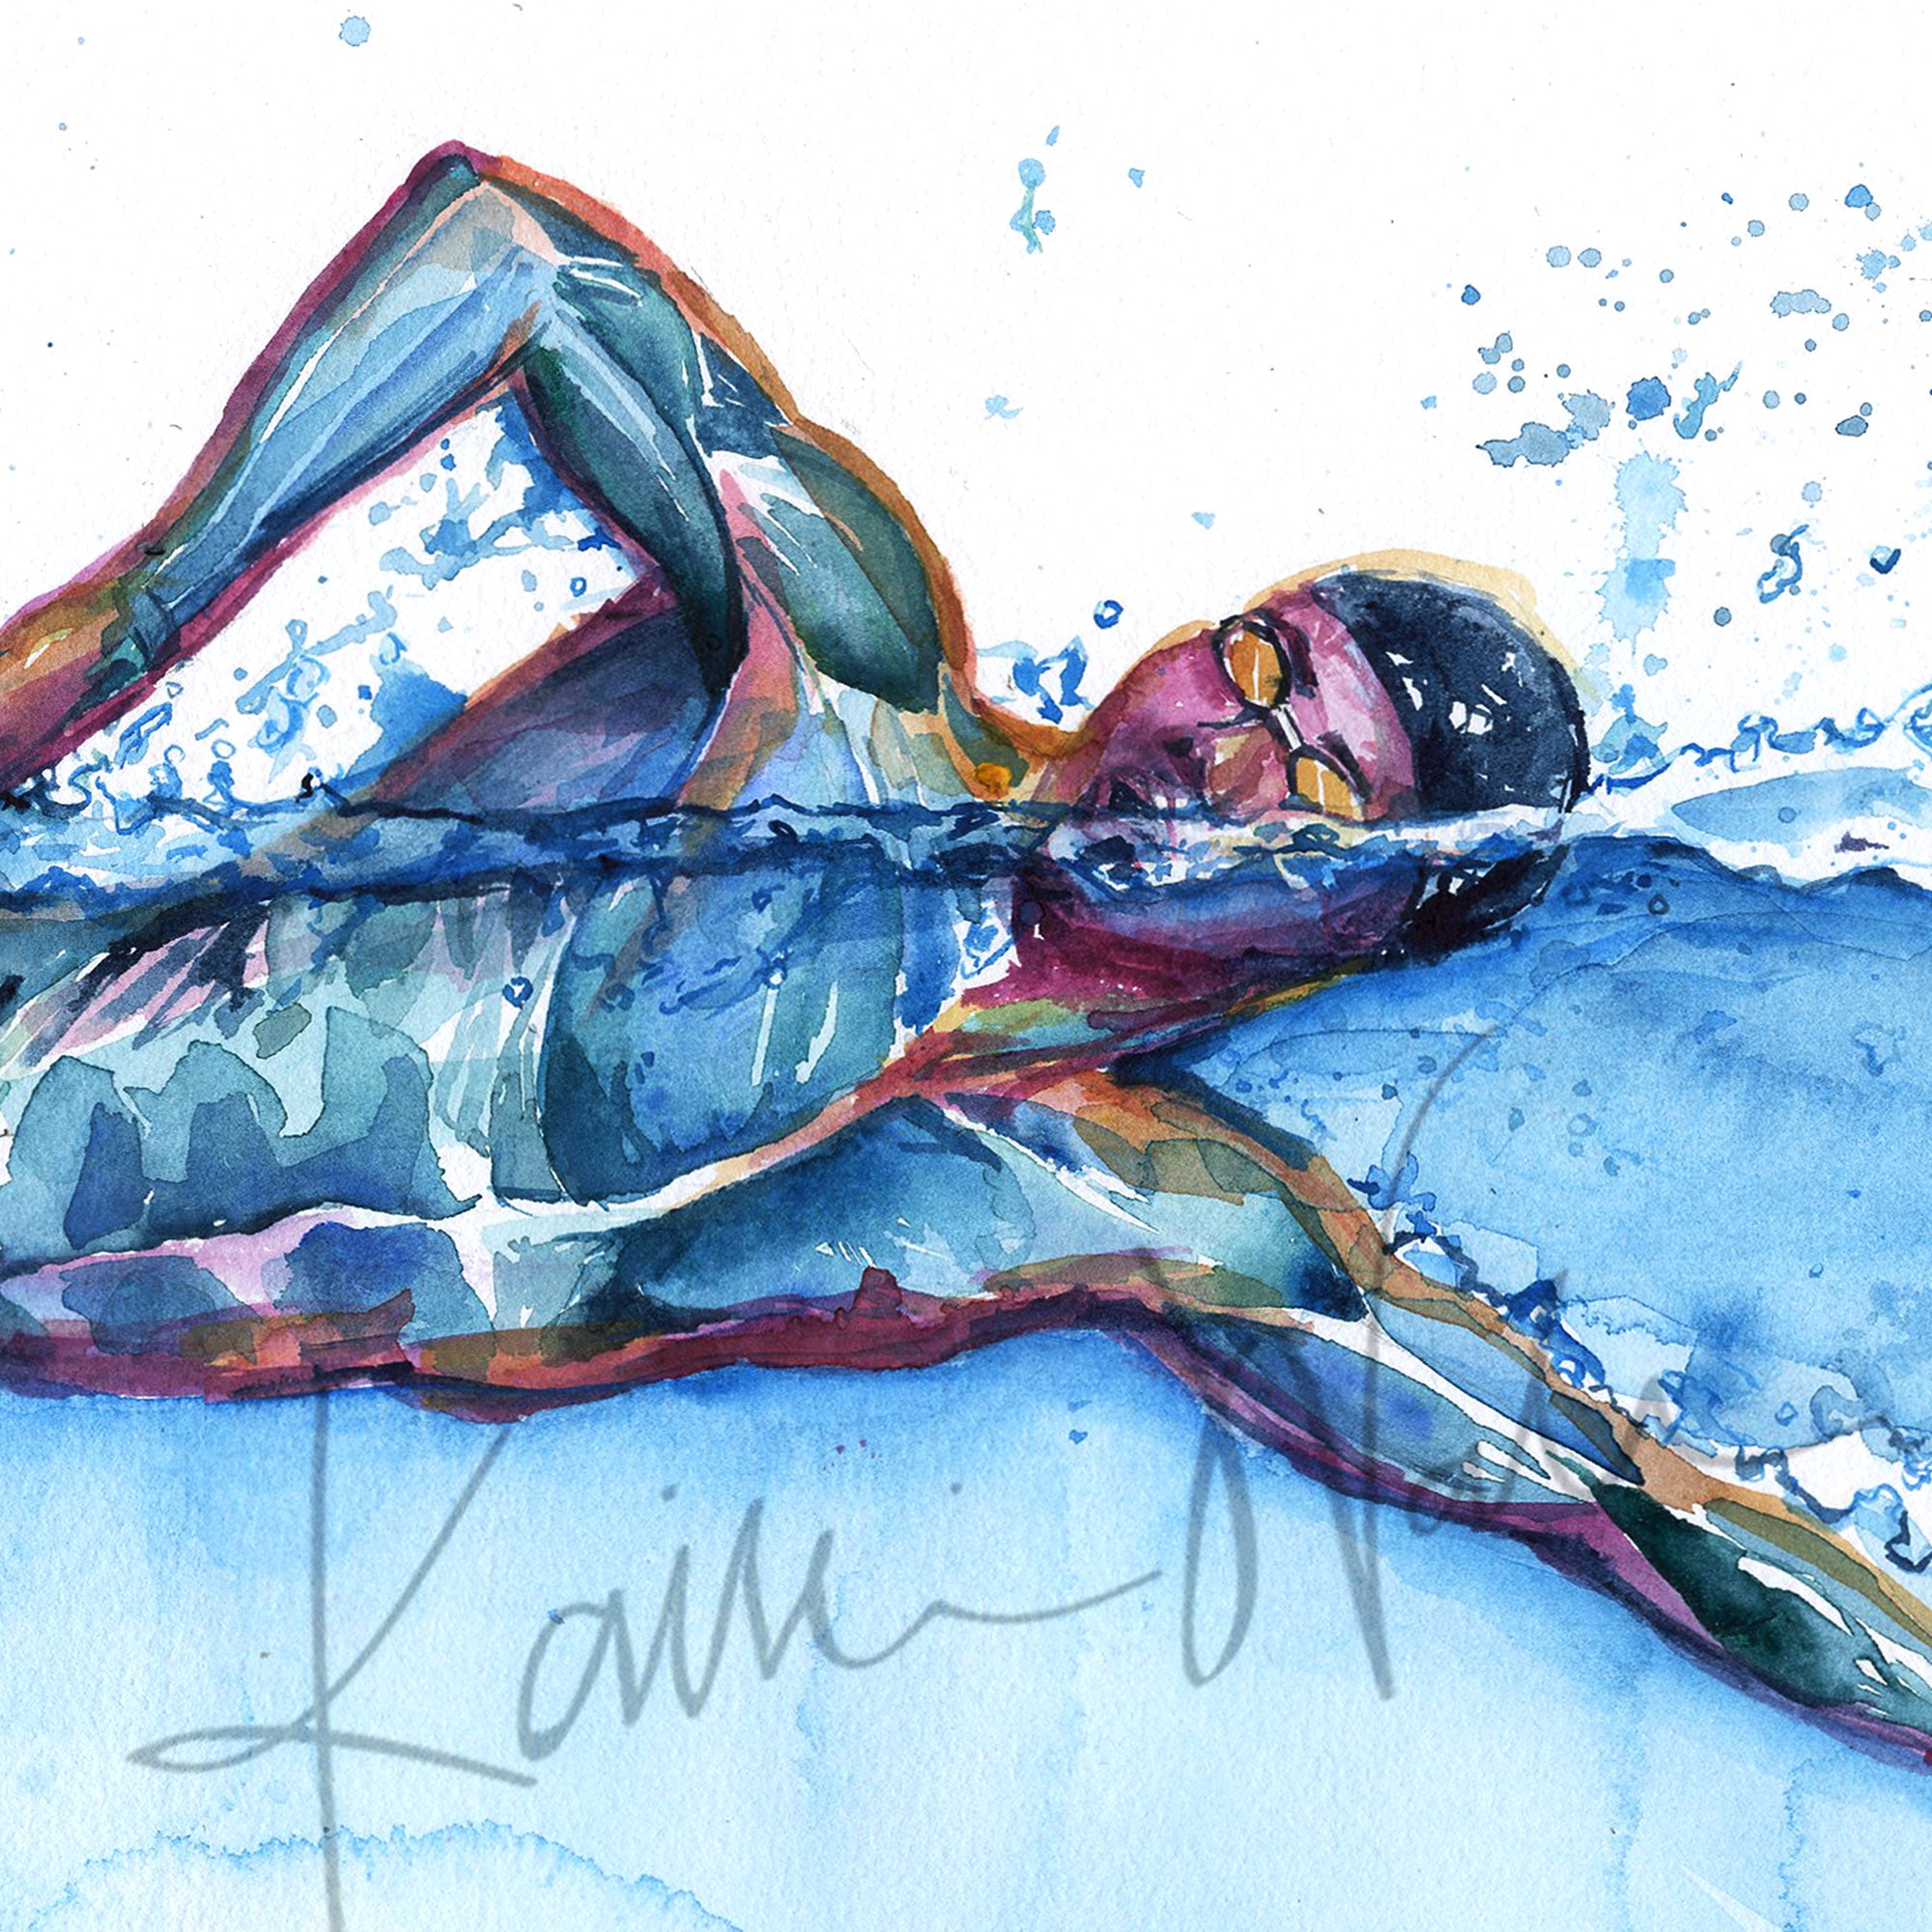 Zoomed in view of a watercolor painting of a swimmer in mid stroke showing the swimmer’s muscular anatomy.